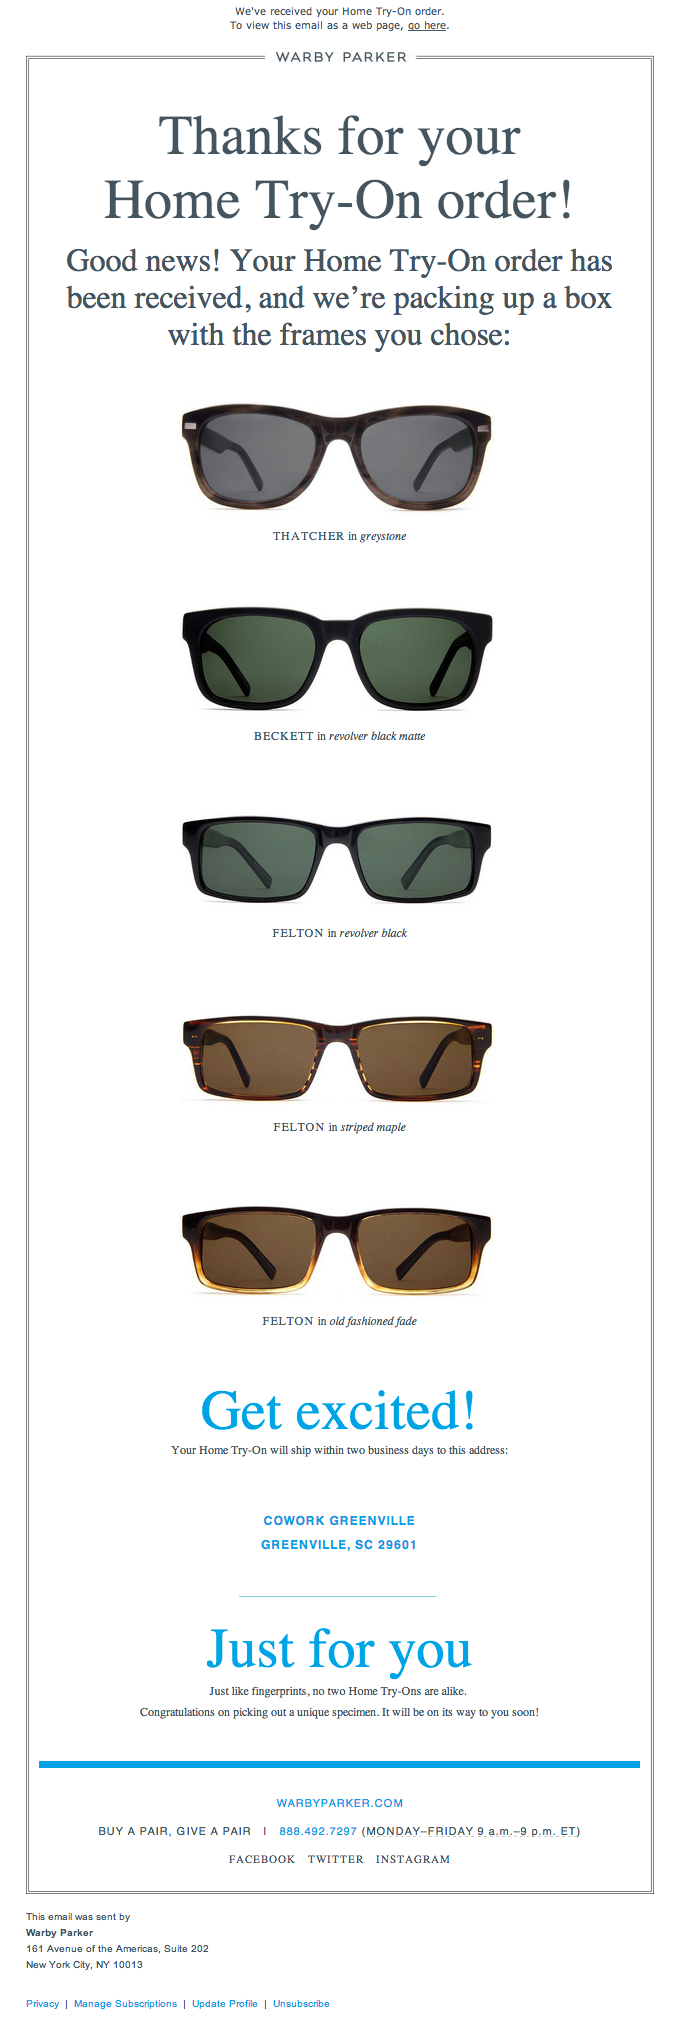 An order confirmation email from Warby Parker.